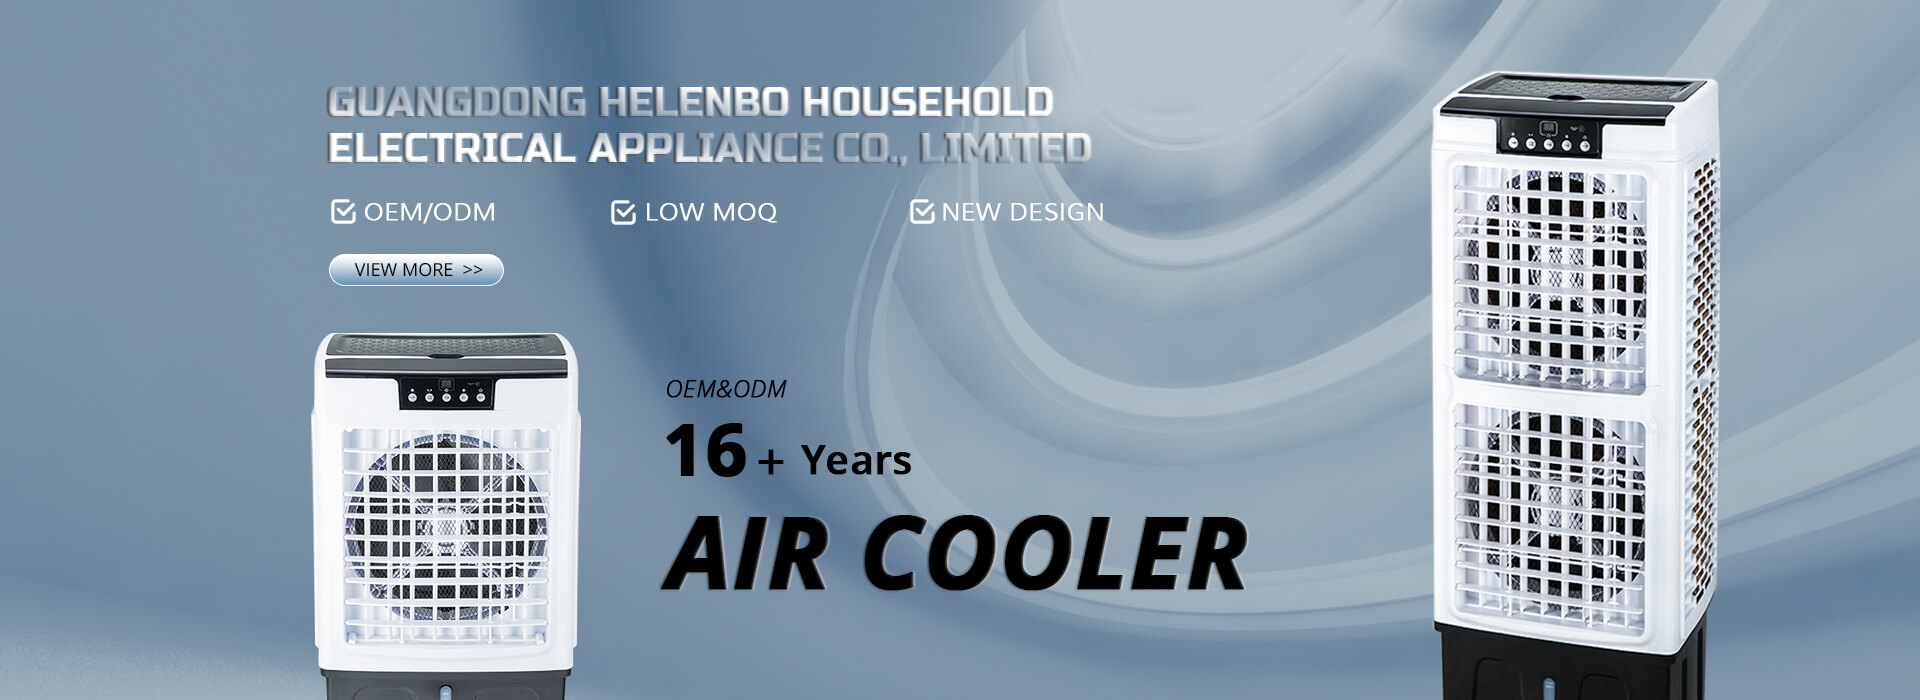 Professional Supplier of Air Cooler